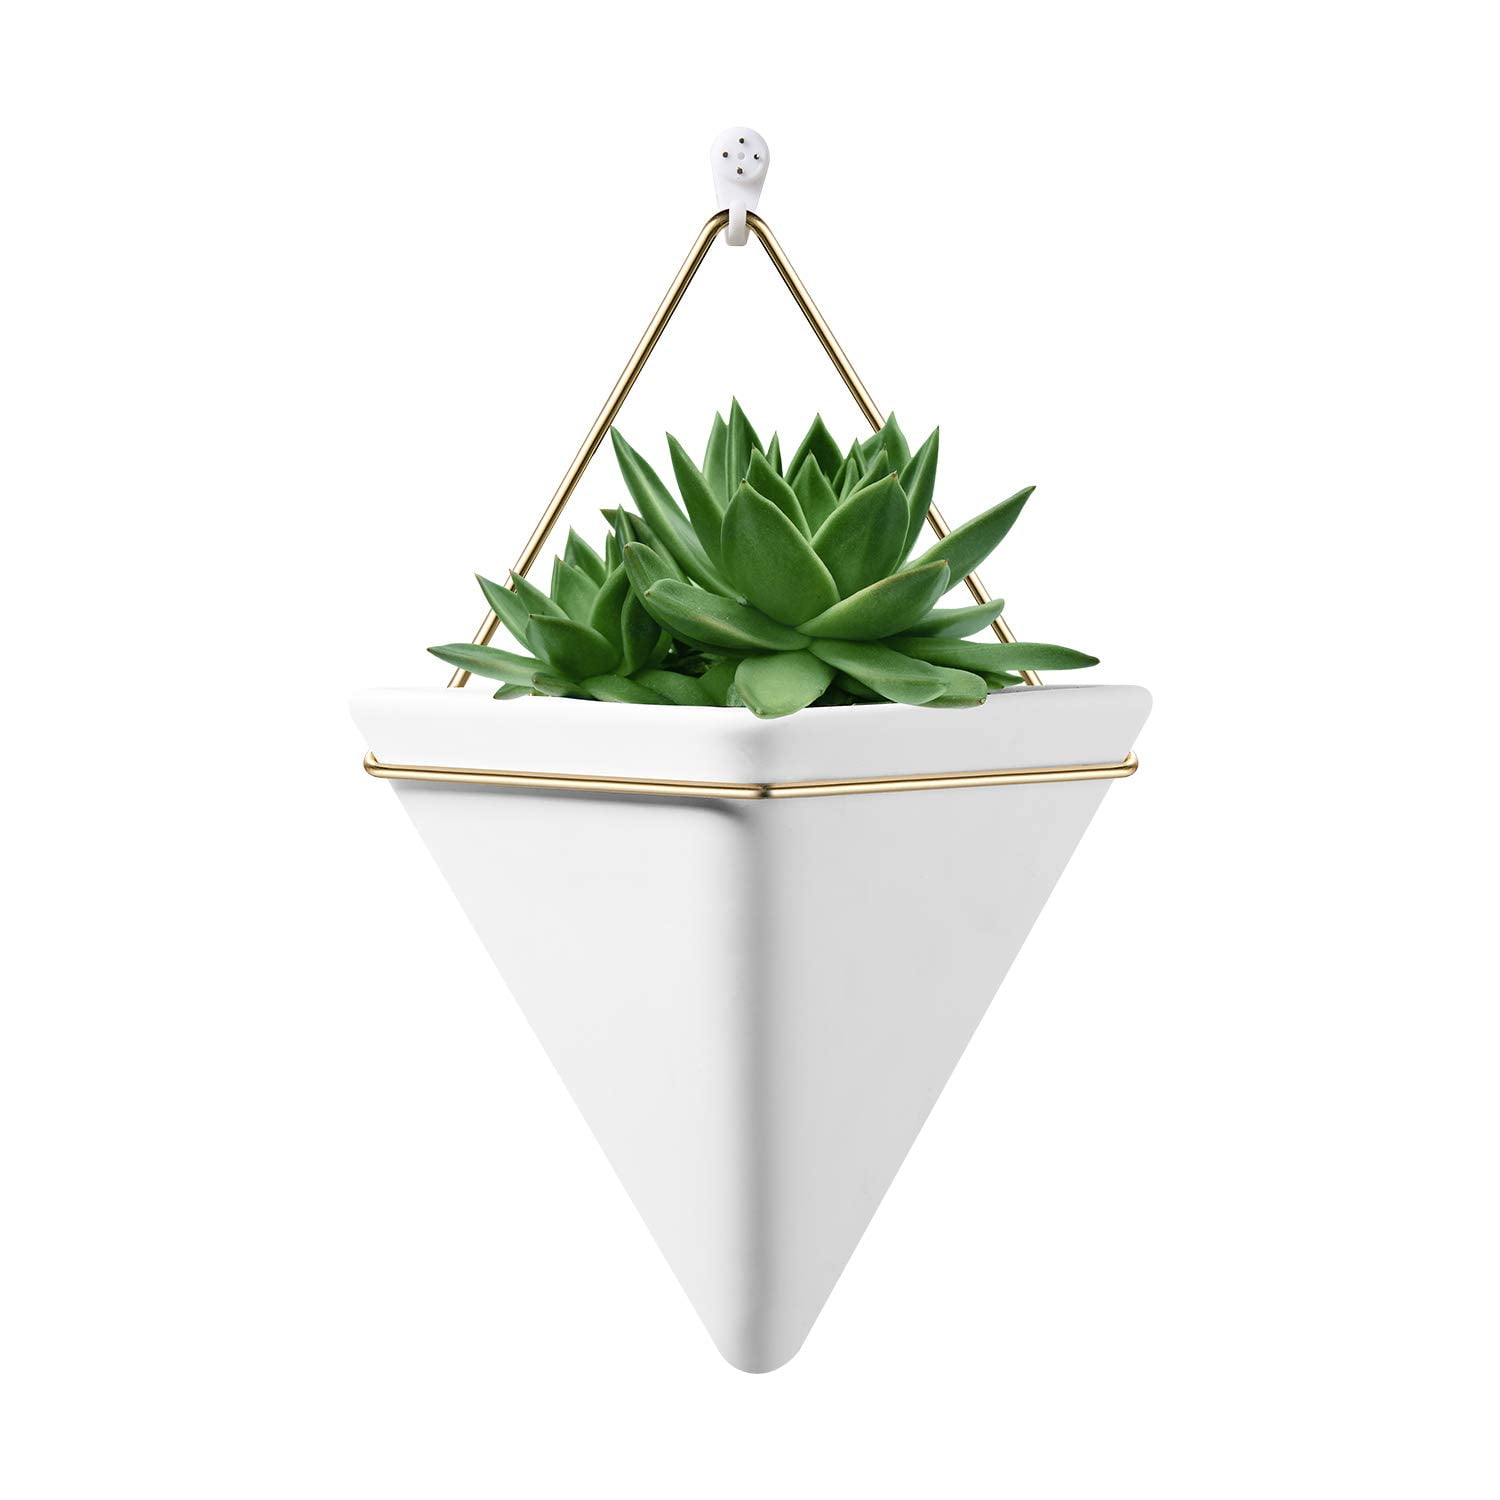 T4U Diamond Wall Planter Geometric Wall Vases Marble White Set of 2 Trigg Ceramic Mounted Succulent Air Plant Flower Pots Cactus Faux Plants Containers White Modern Indoor Decor for Home and Office 